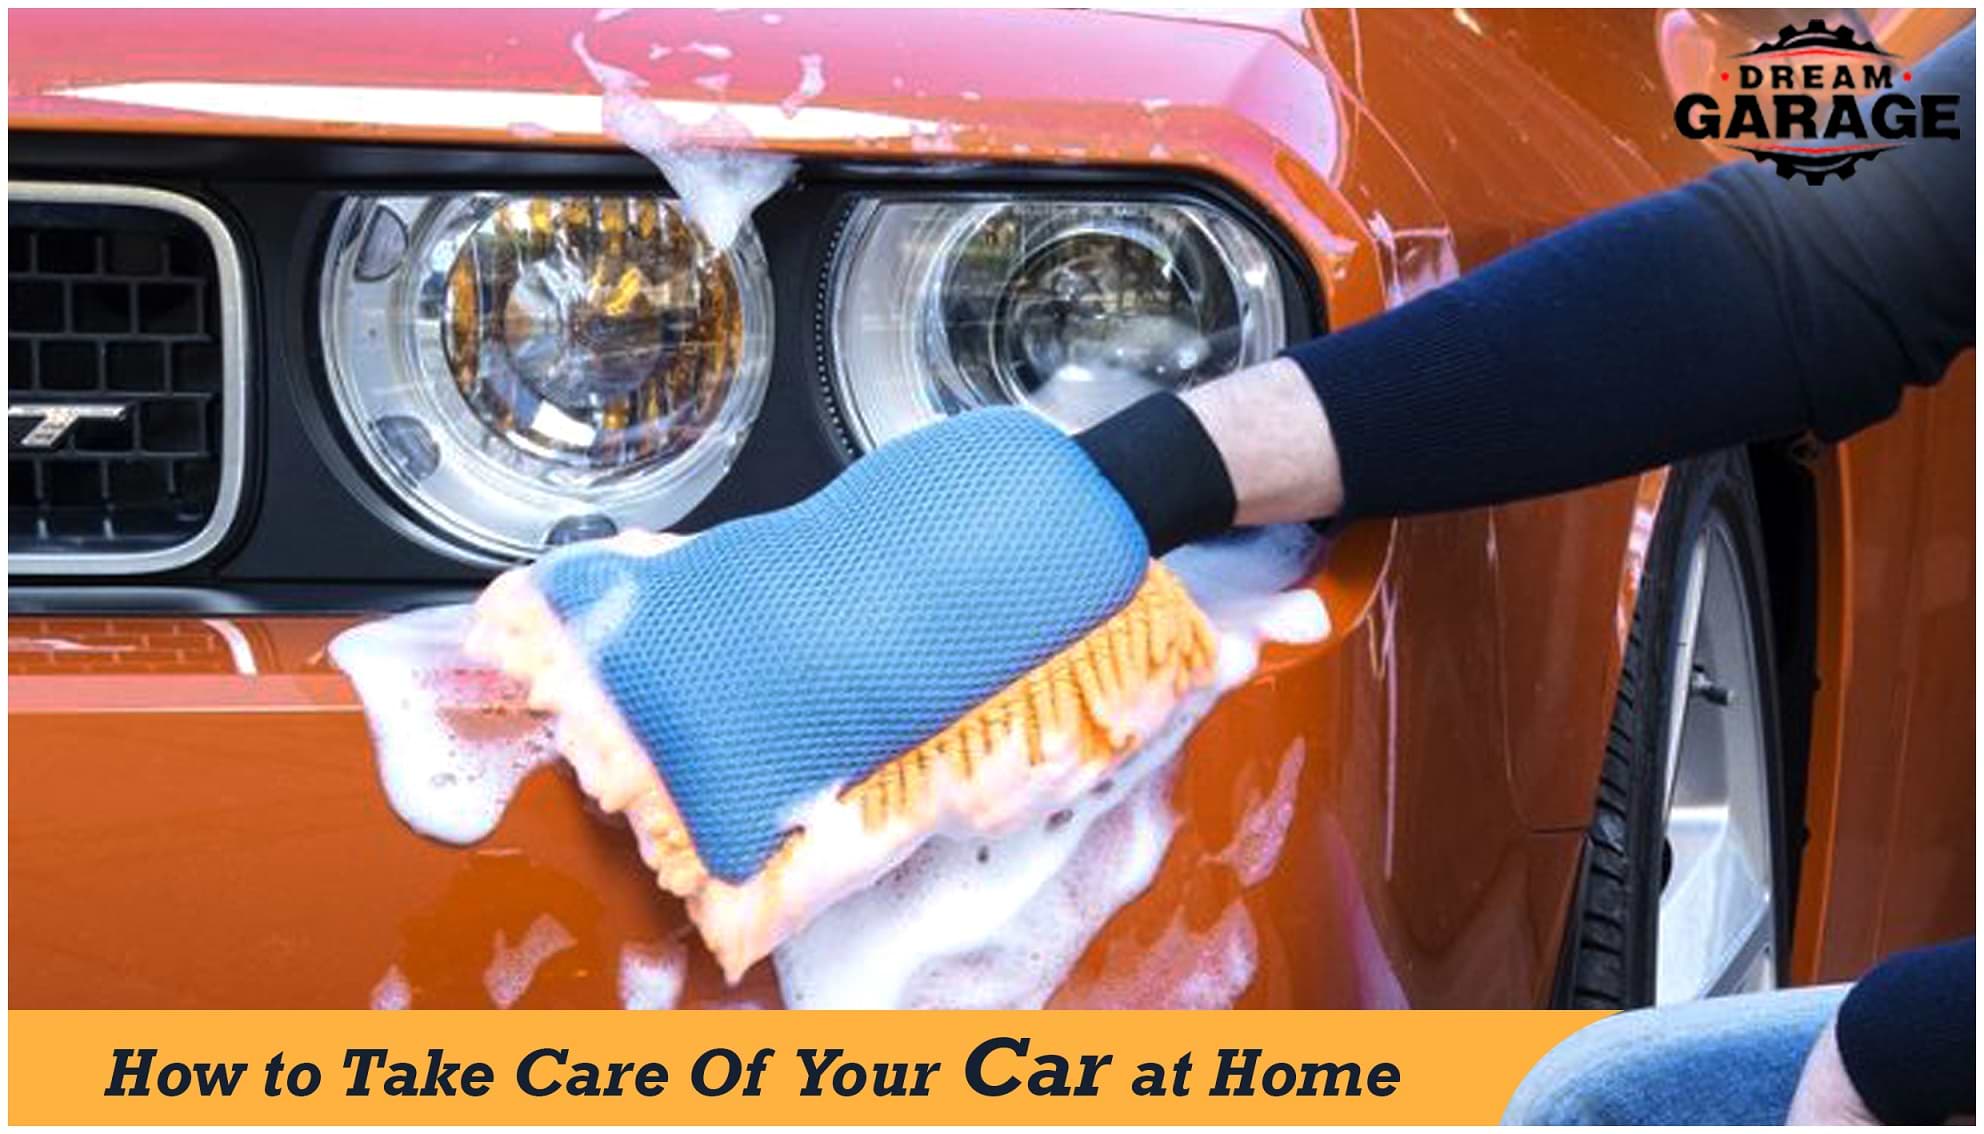 How to take care of your car at home